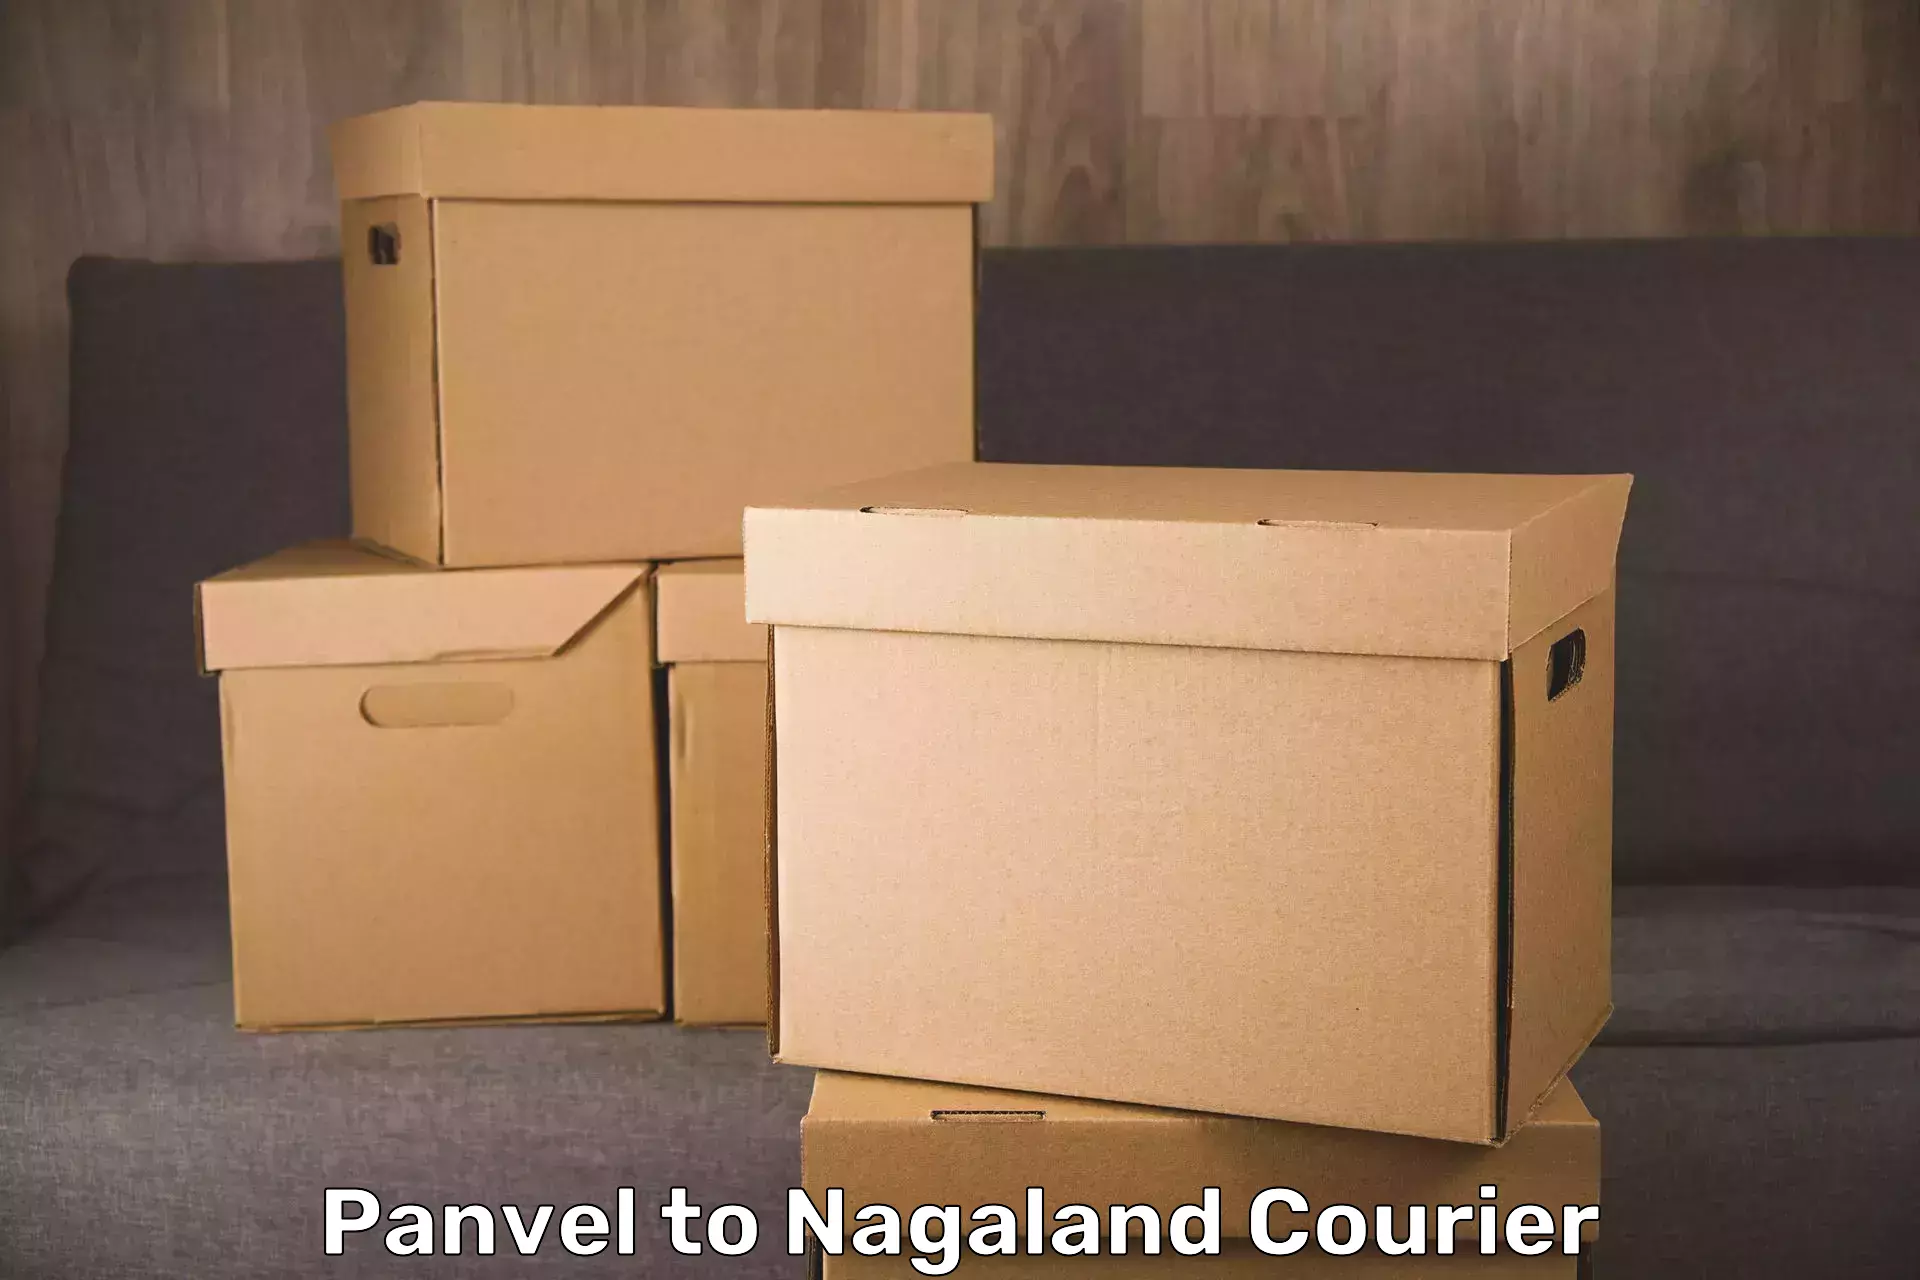 Luggage delivery network Panvel to Mokokchung